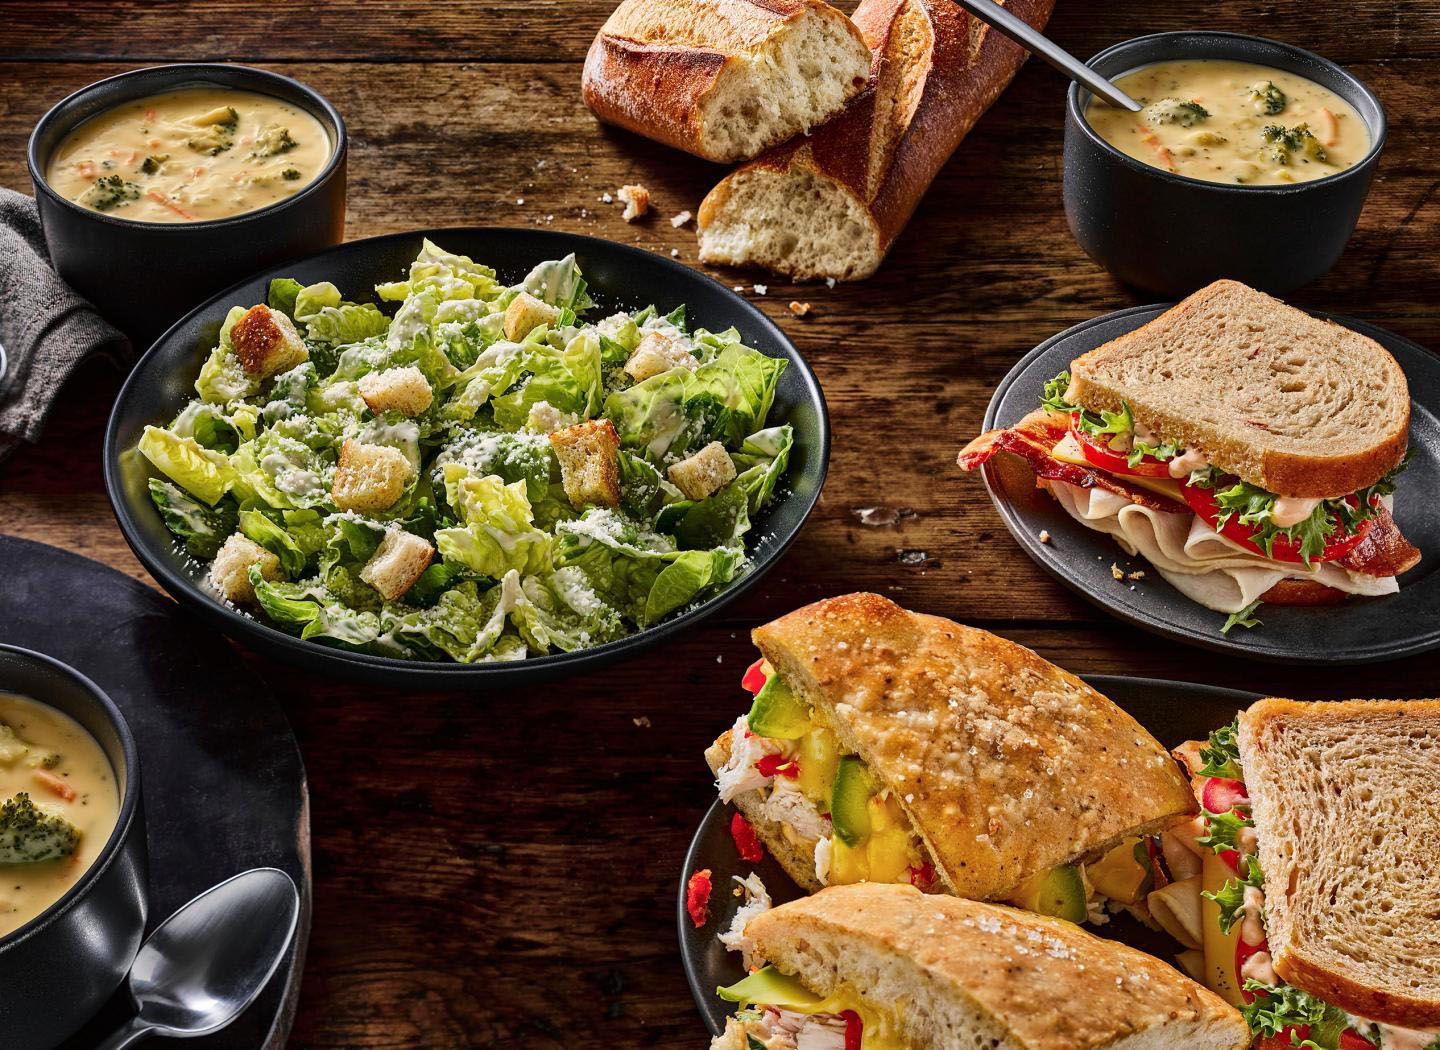 Panera Bread Rolls Out New Family Feast Value Meals Starting at $29